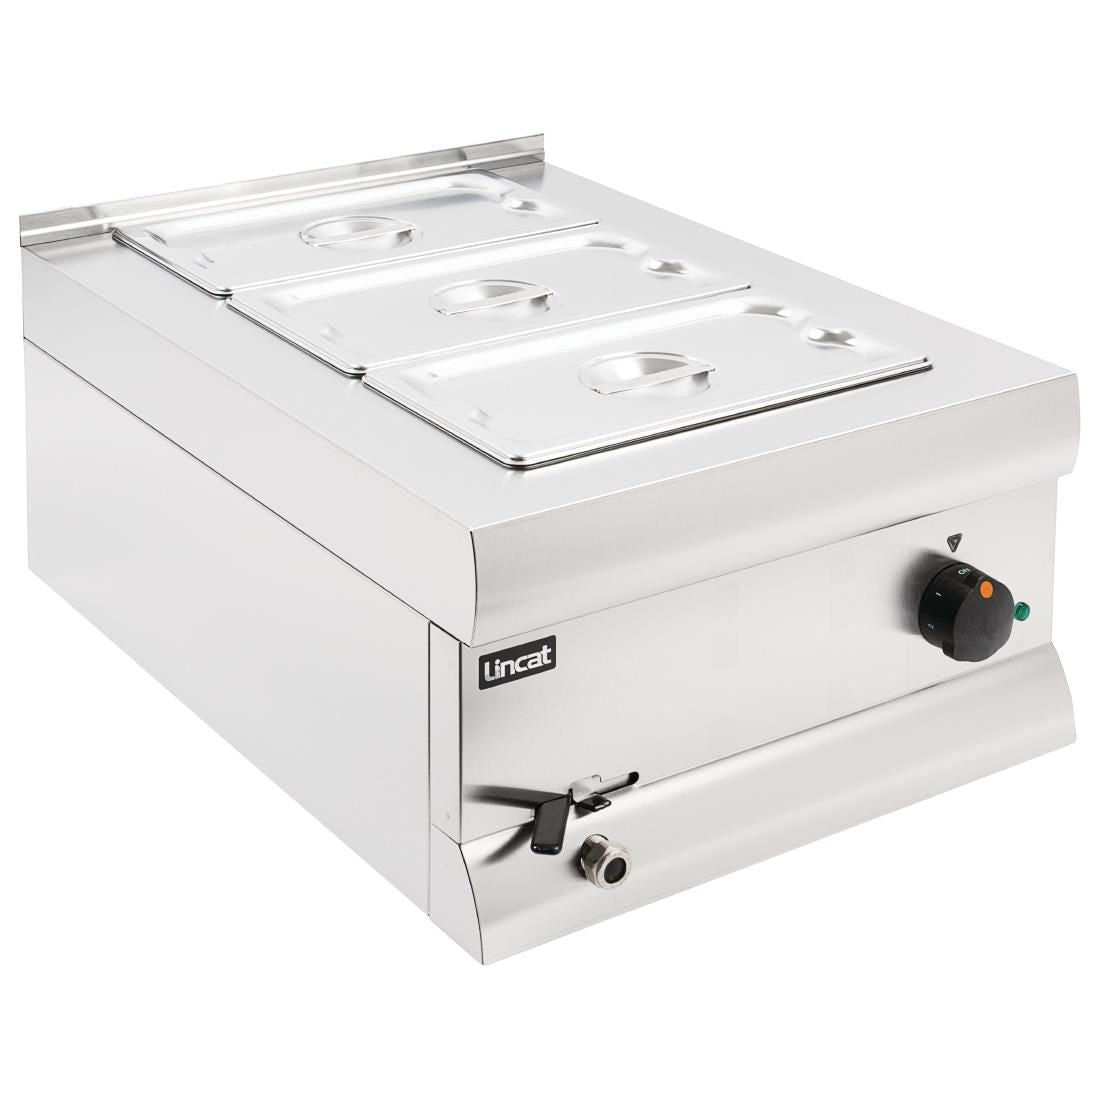 BM4BW - Lincat Silverlink 600 Electric Counter-top Bain Marie - Wet Heat - Gastronorms - Base + Dish Pack - W 450 mm - 1.0 kW JD Catering Equipment Solutions Ltd